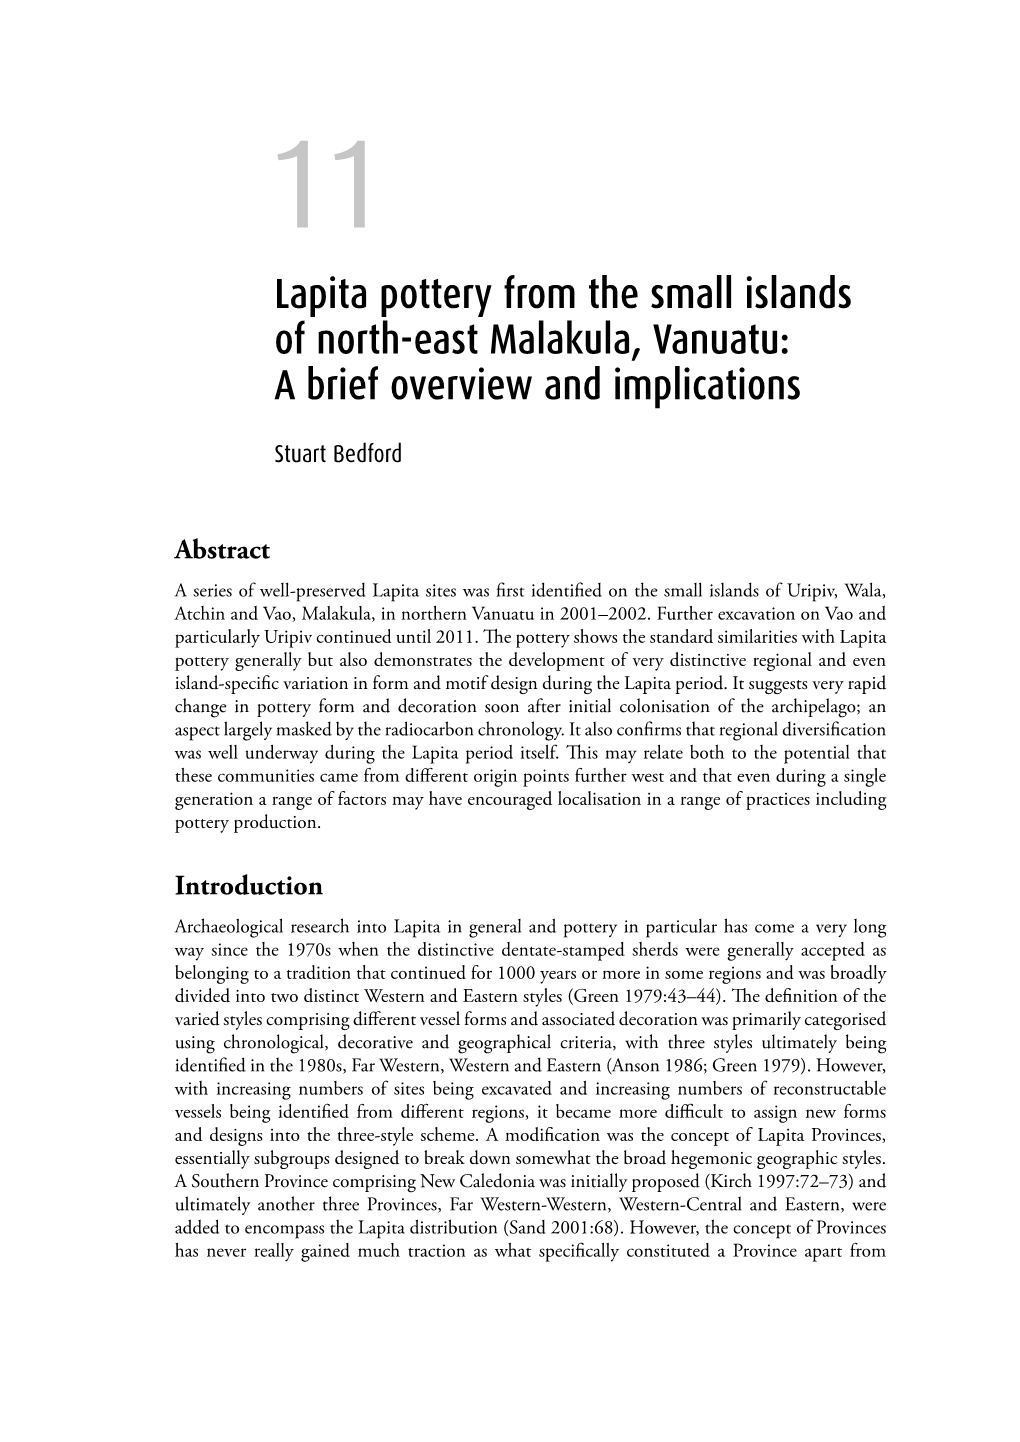 Lapita Pottery from the Small Islands of North-East Malakula, Vanuatu: a Brief Overview and Implications